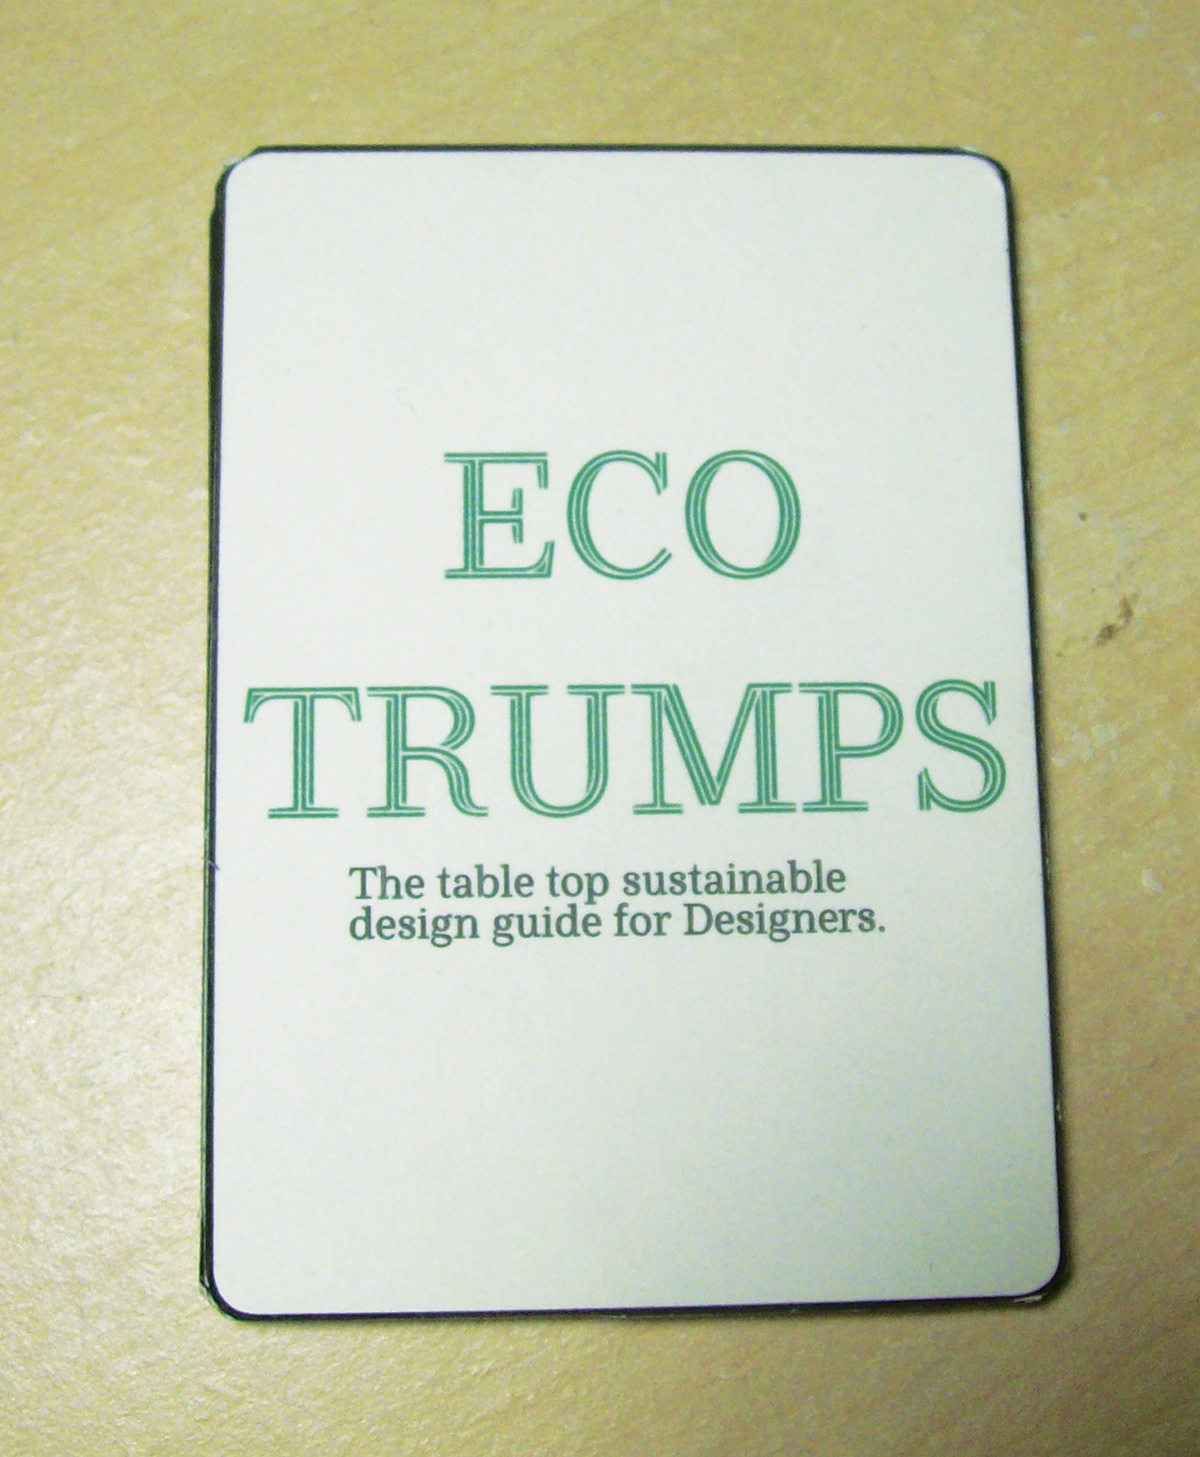 ethical design eco friendly Playing Cards trumps display poster Ryman eco